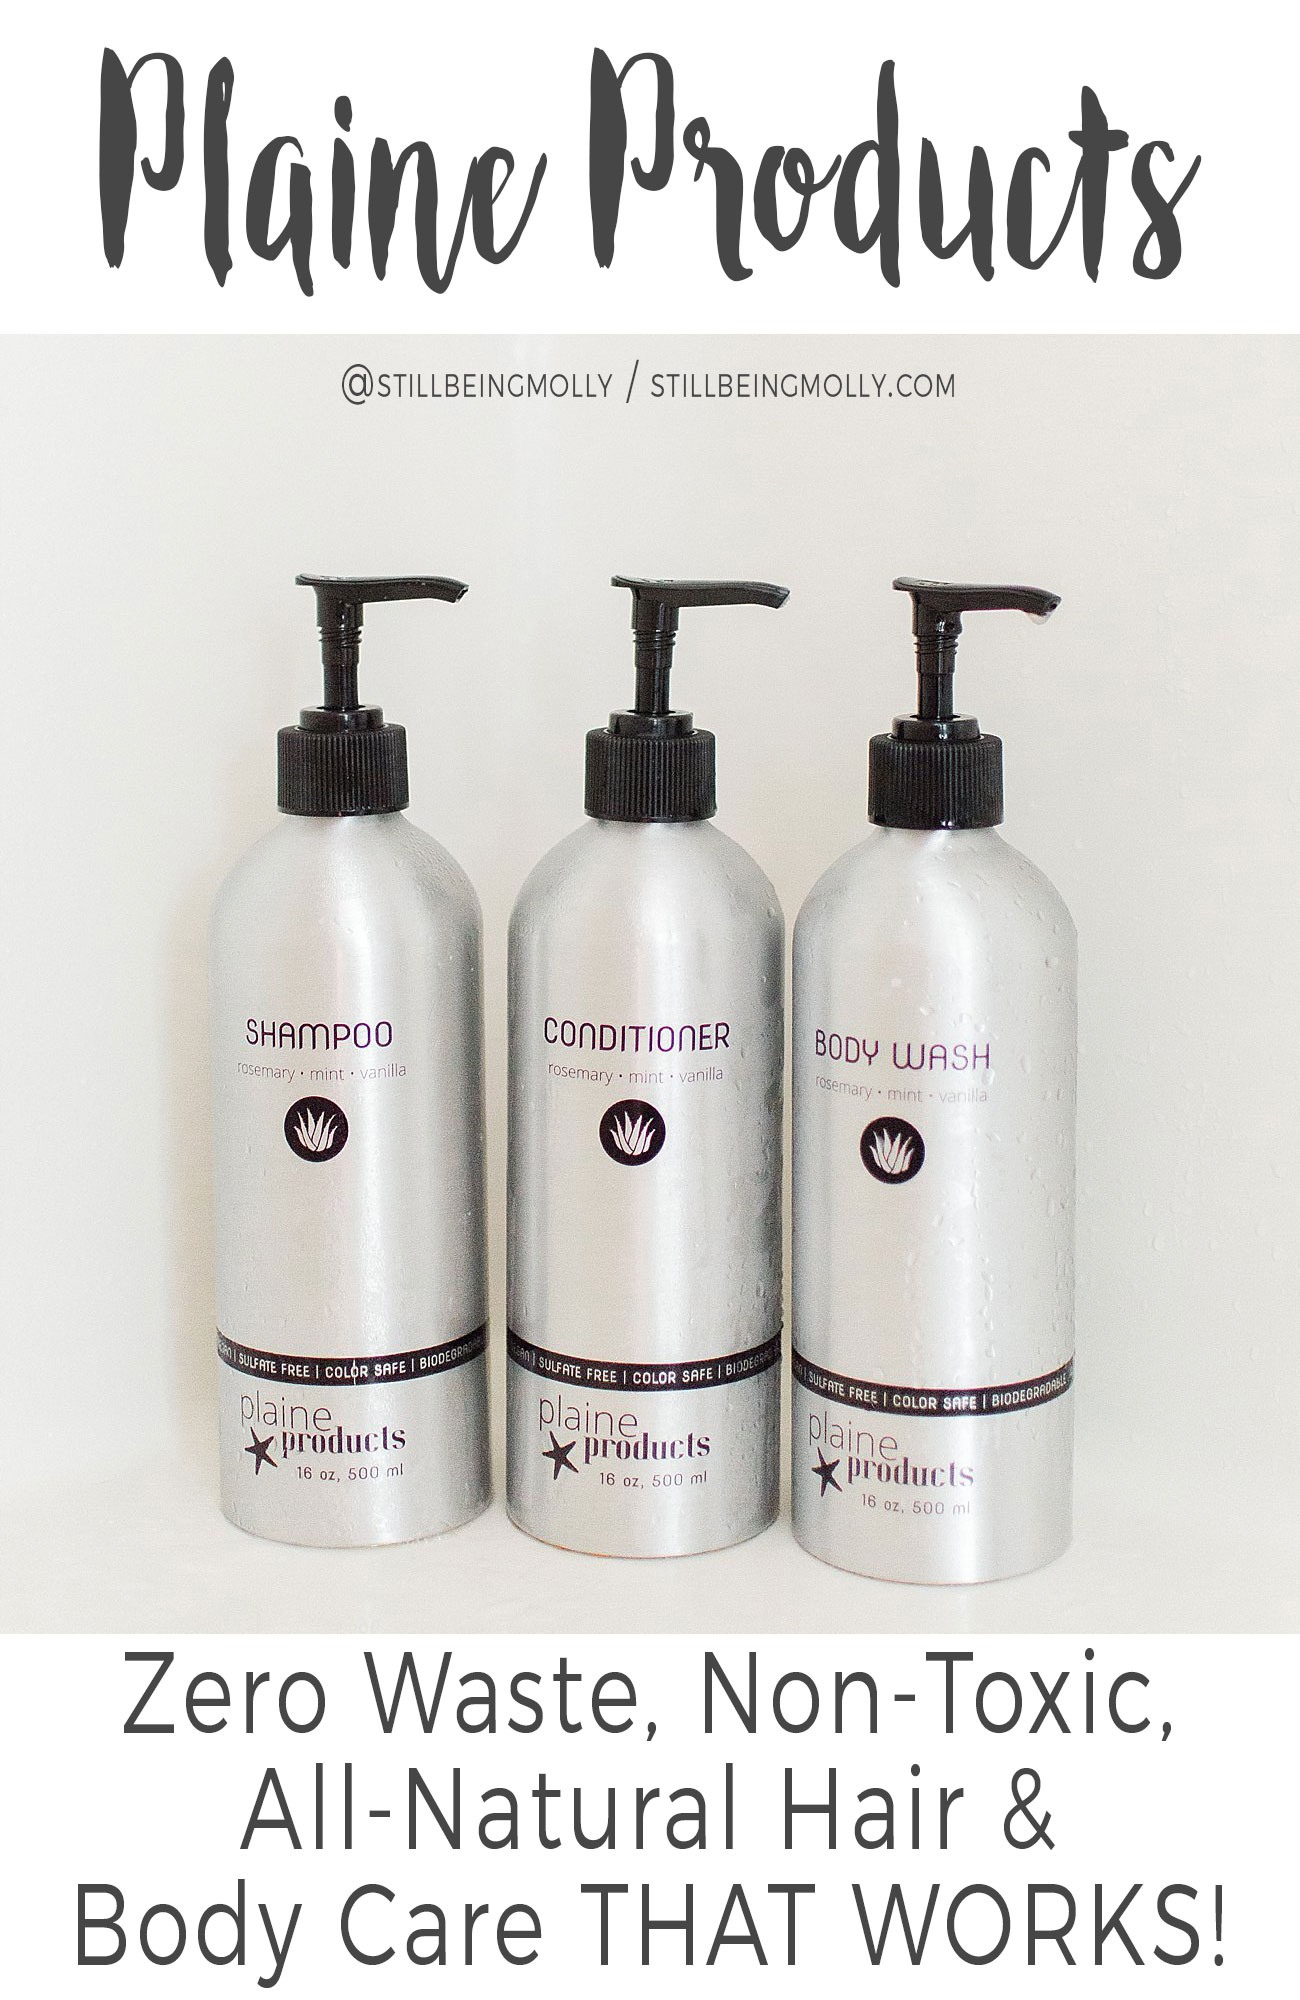 Plaine Products Review: Zero-Waste, Non-Toxic, All-Natural Hair and Body Care That WORKS! (3) - Plaine Products Review: Zero-Waste, Non-Toxic, All-Natural Hair and Body Care That WORKS! by North Carolina ethical blogger Still Being Molly